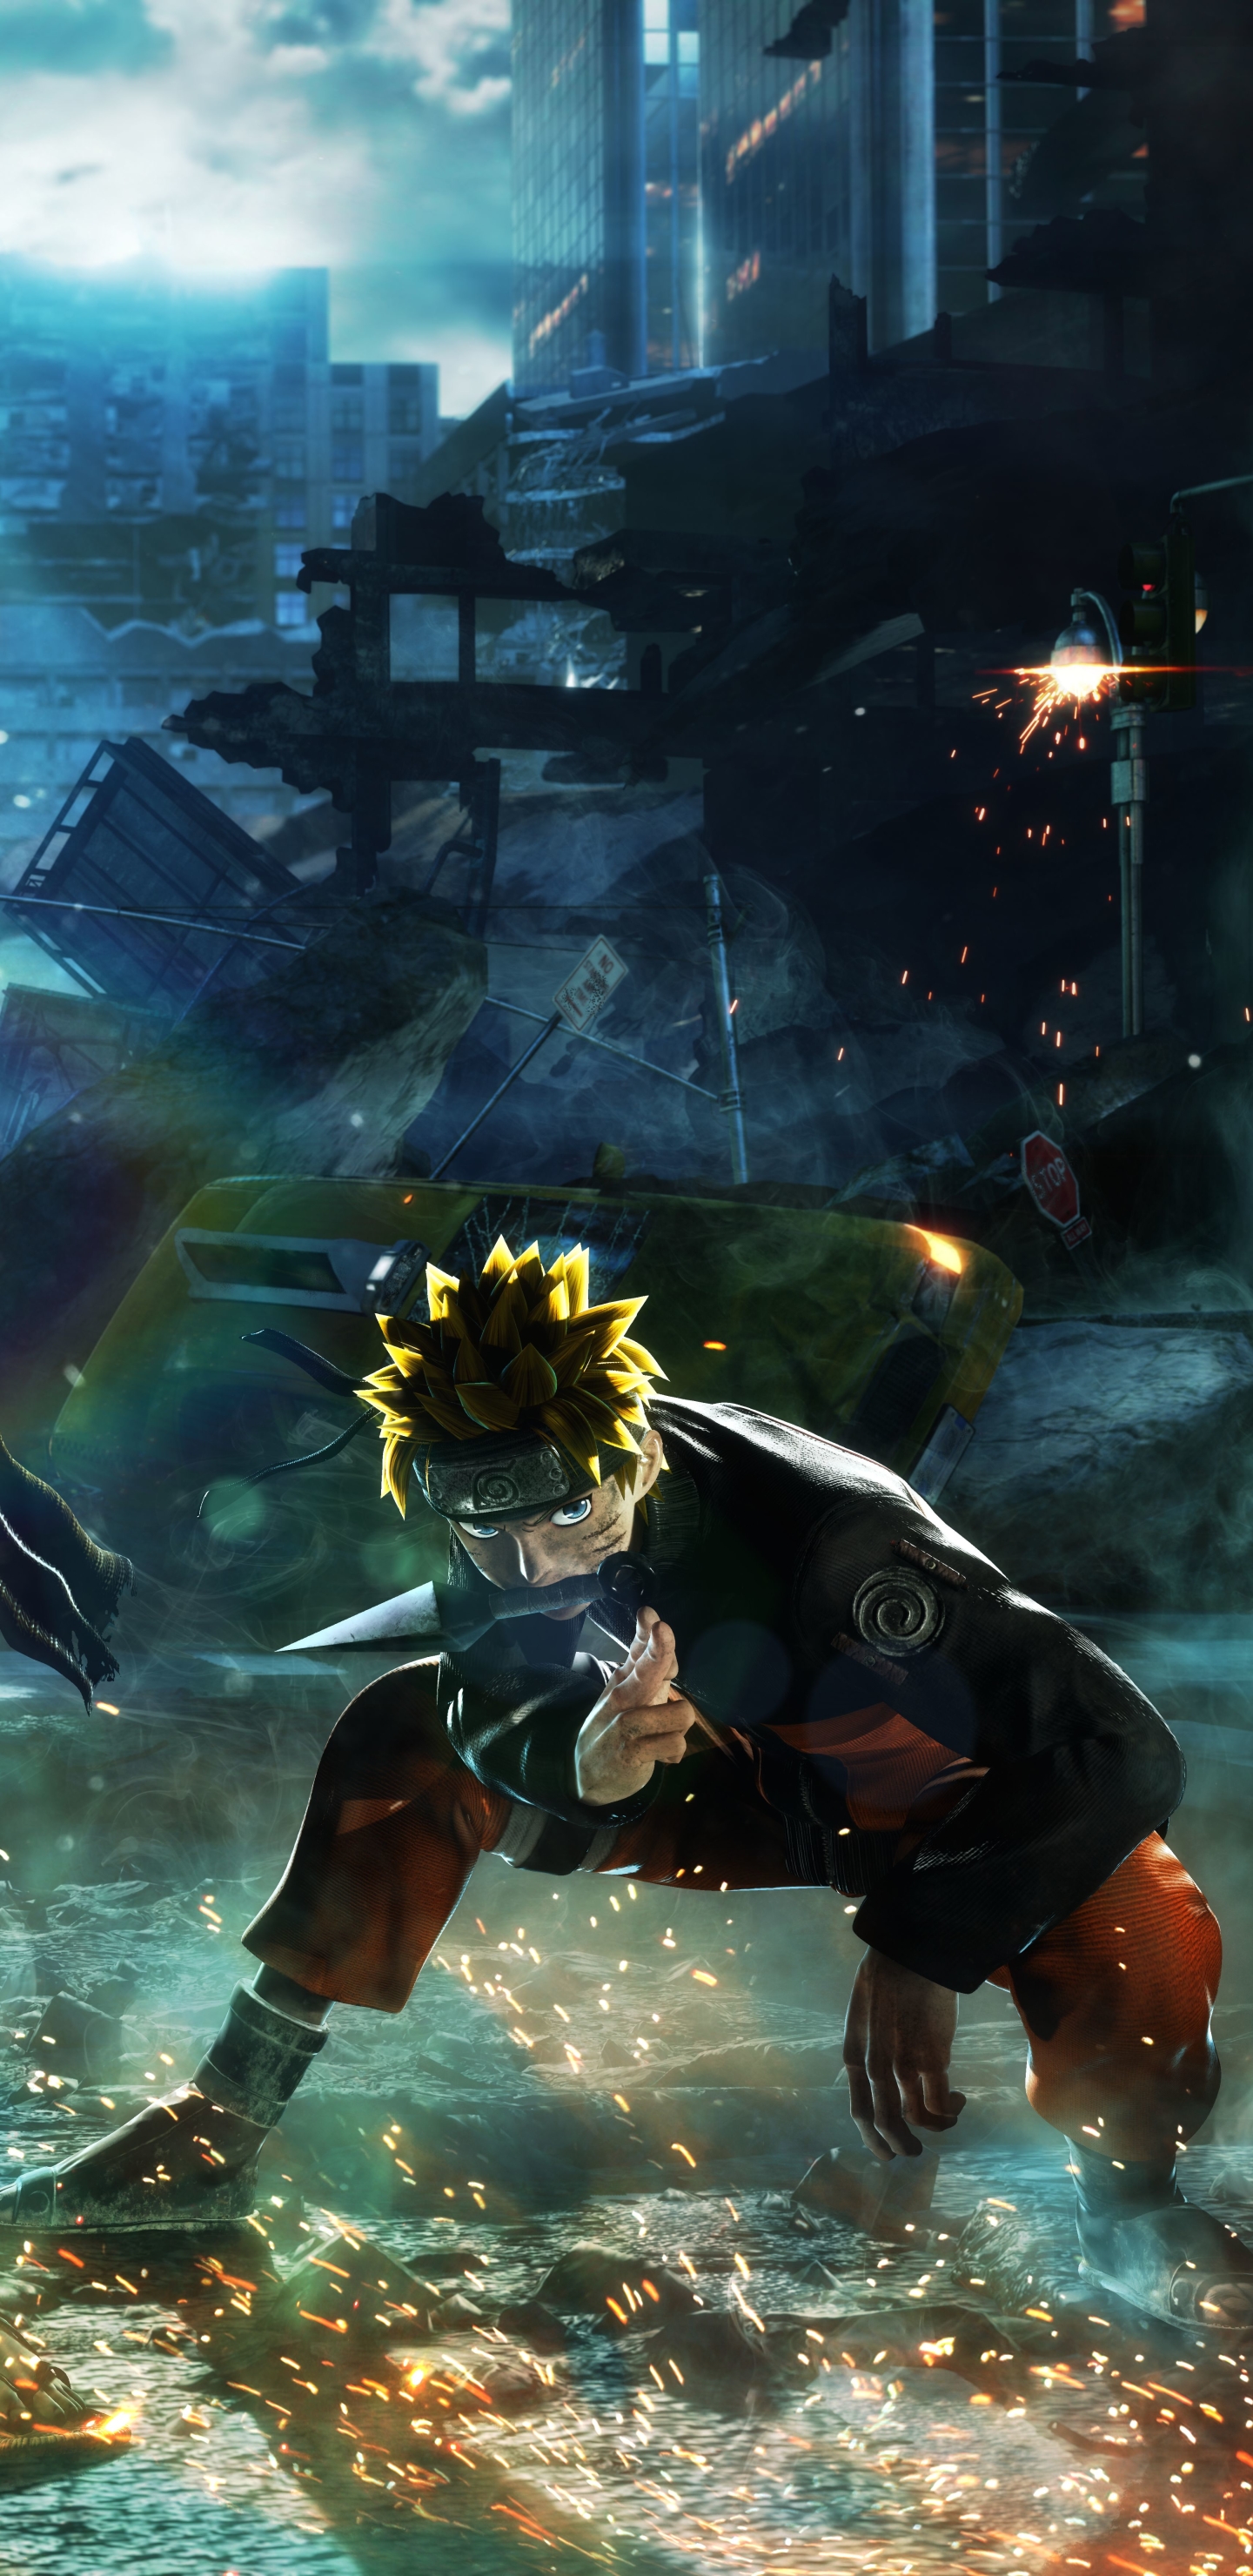 naruto uzumaki, video game, jump force cell phone wallpapers